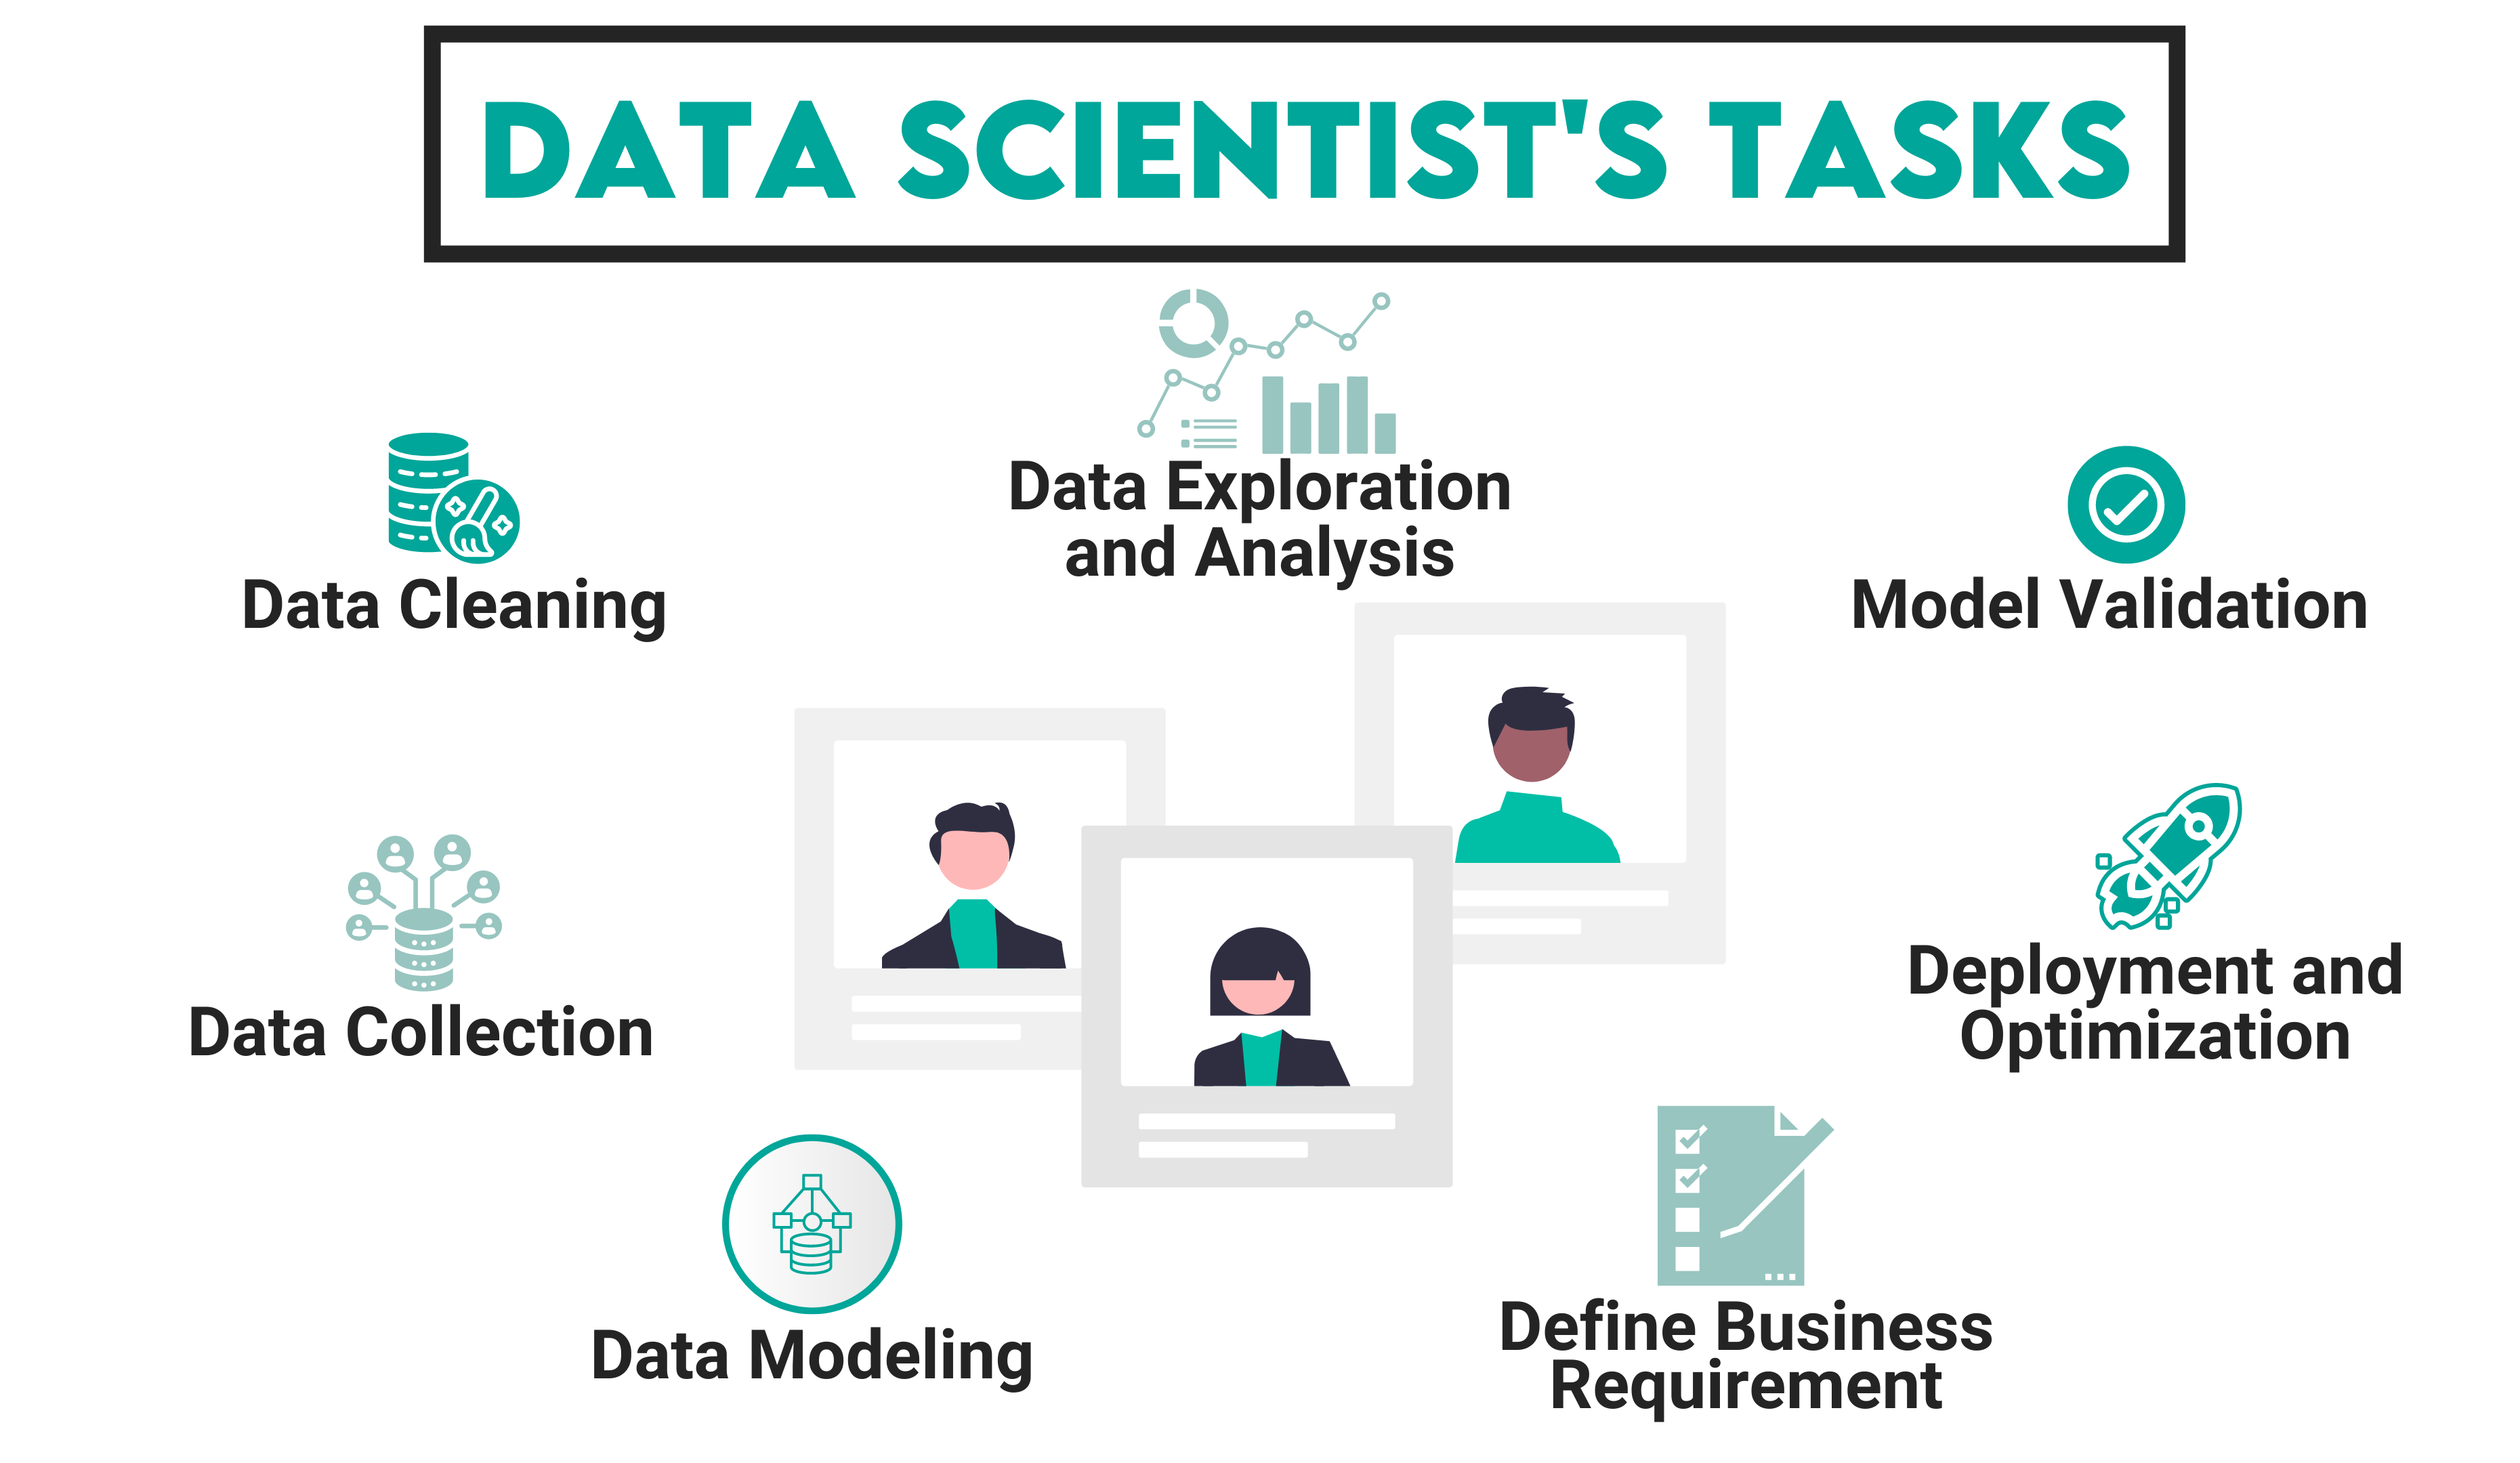 What does a Data Scientist do